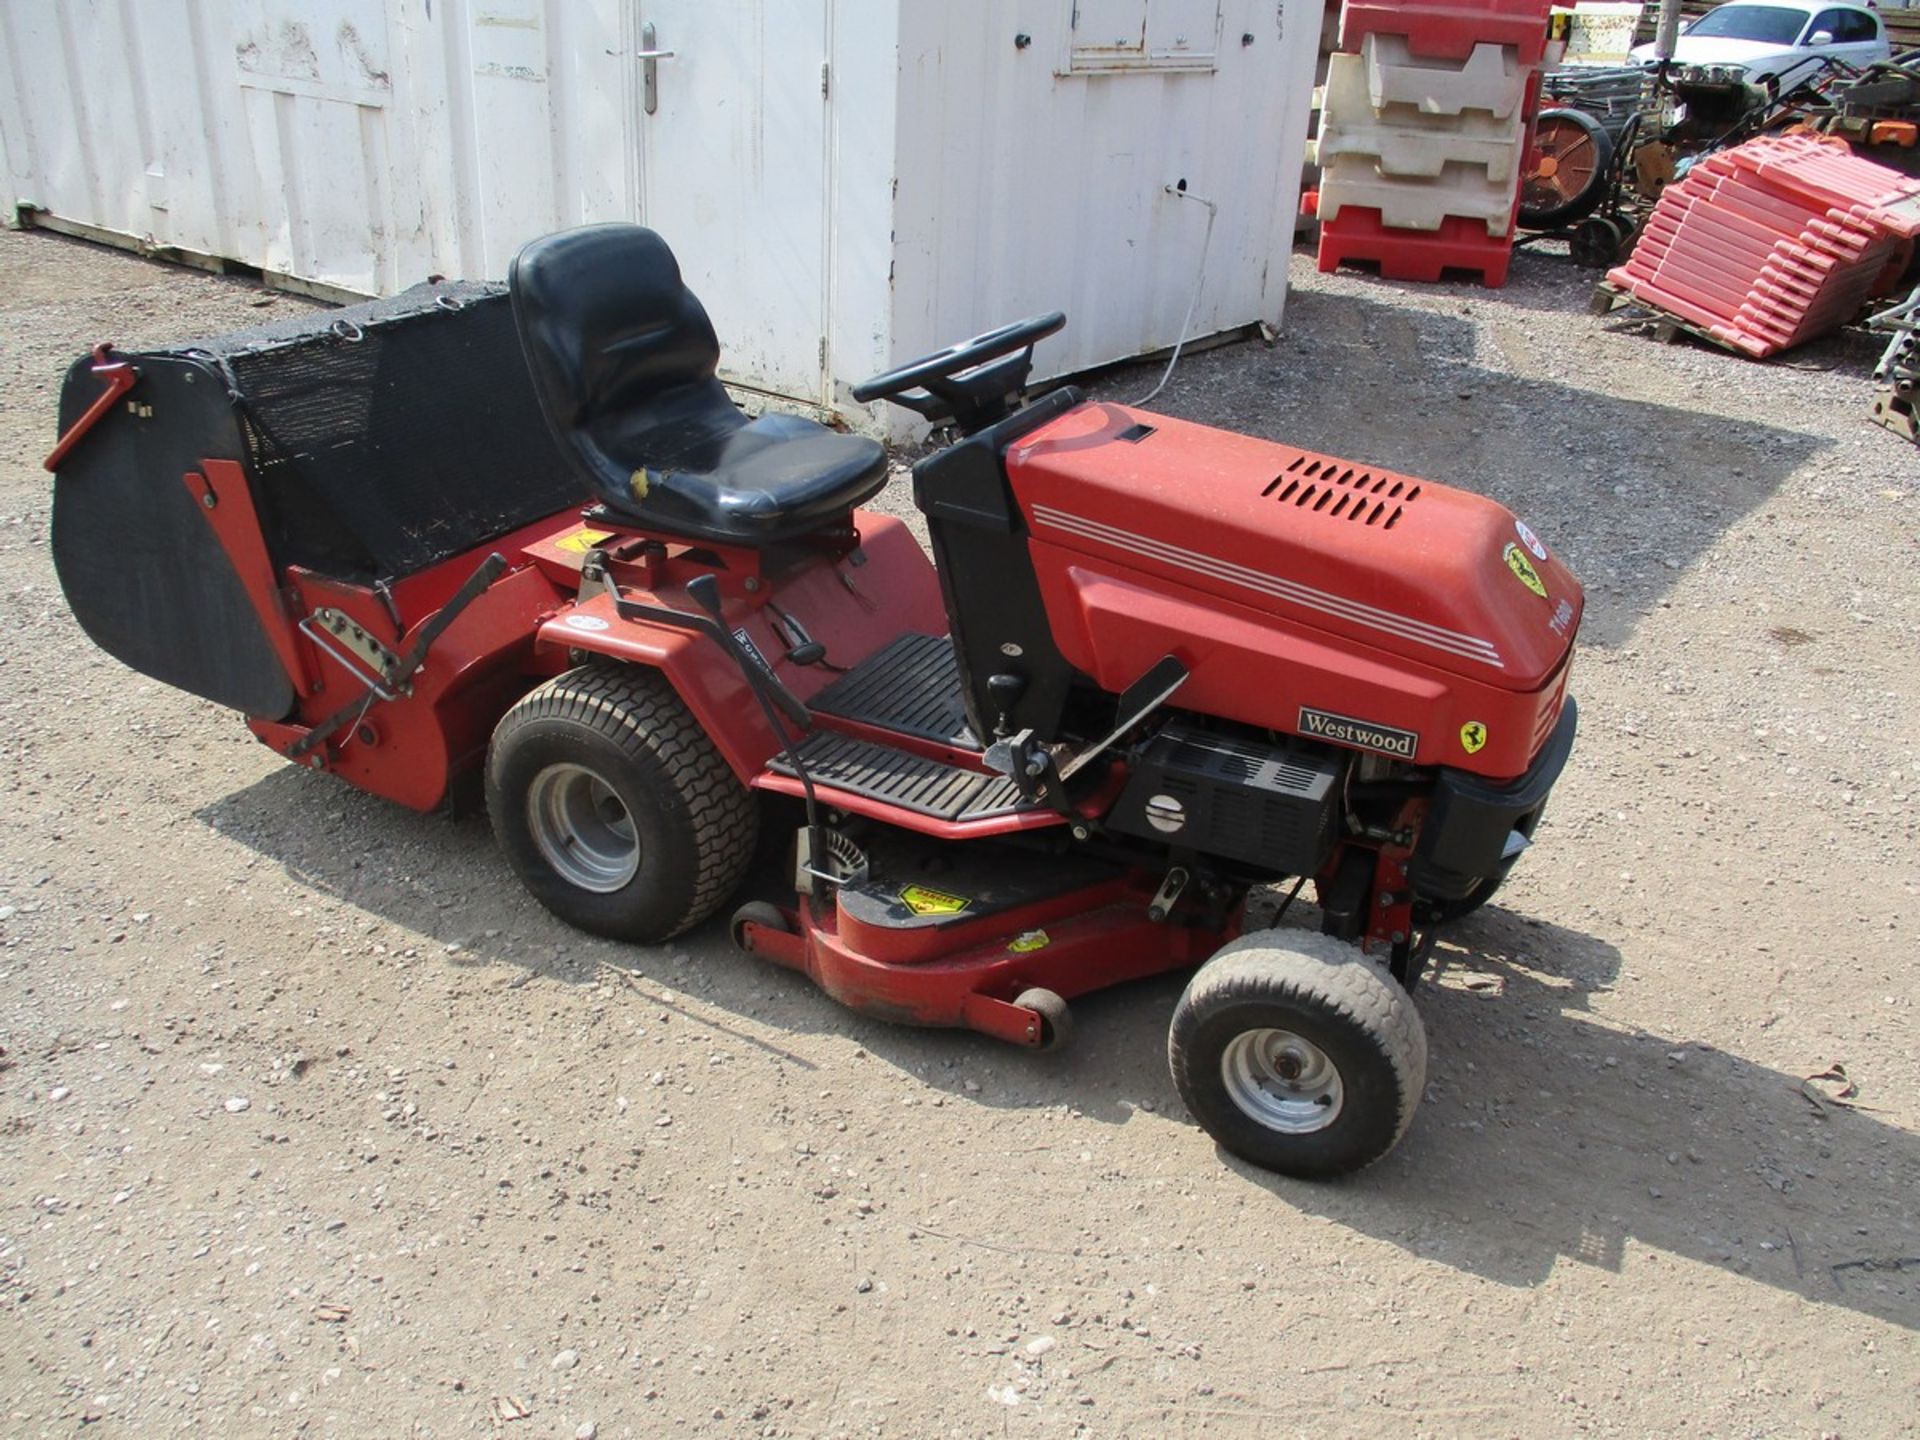 WESTWOOD T1600 RIDE ON MOWER - Image 2 of 3